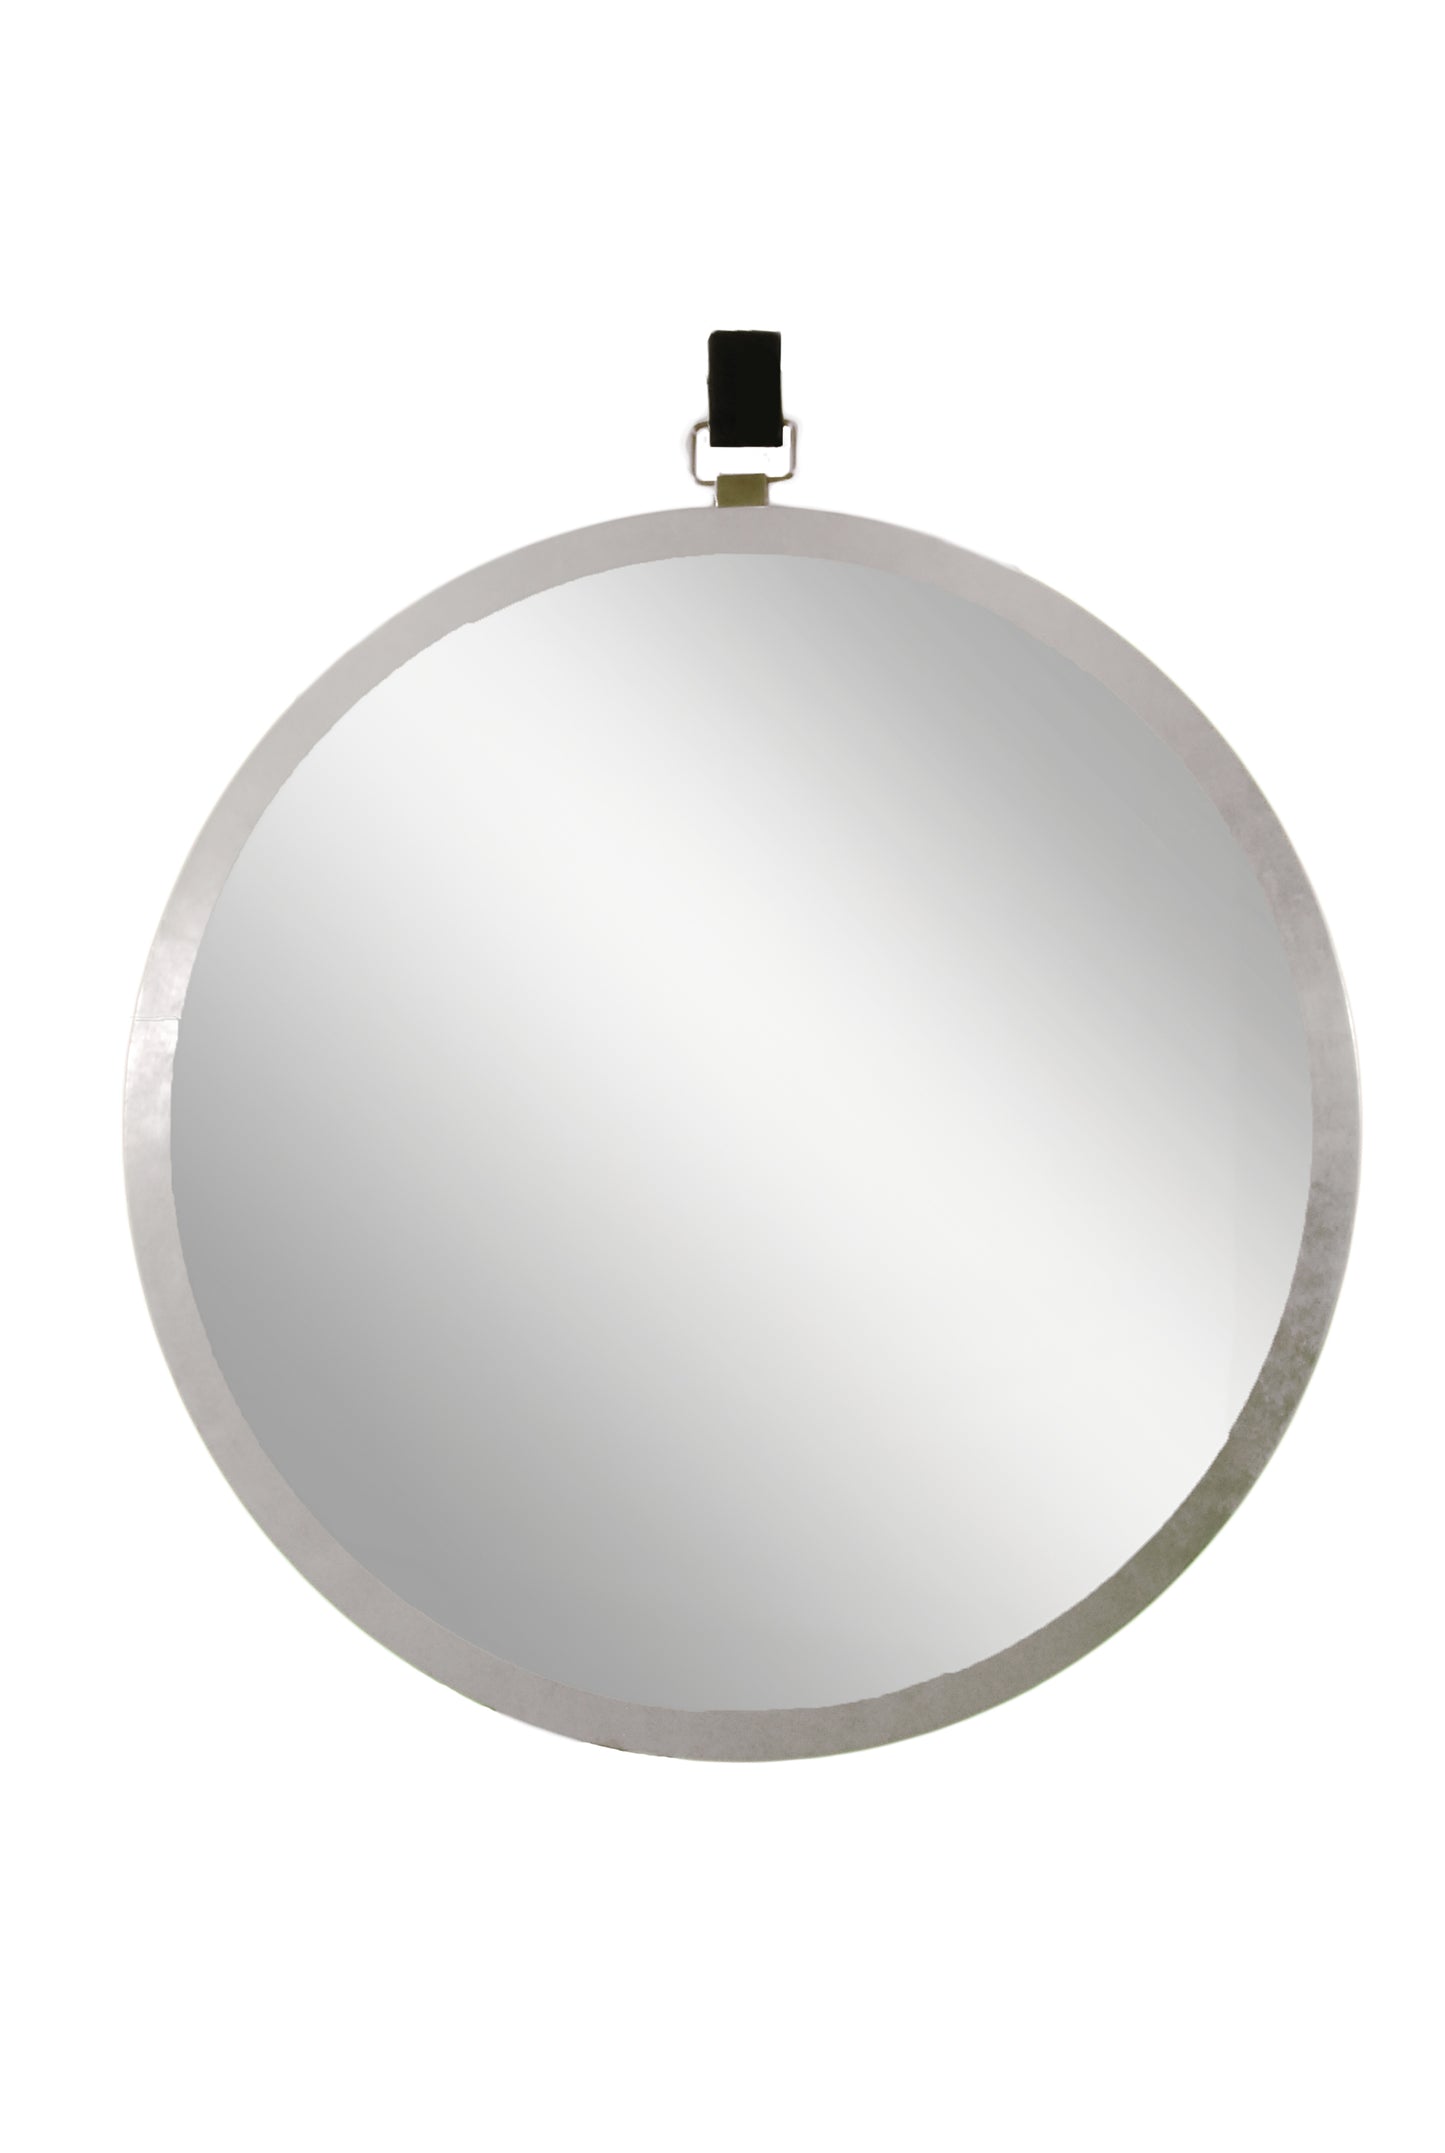 Round mirror with metal frame and decorative leather strap